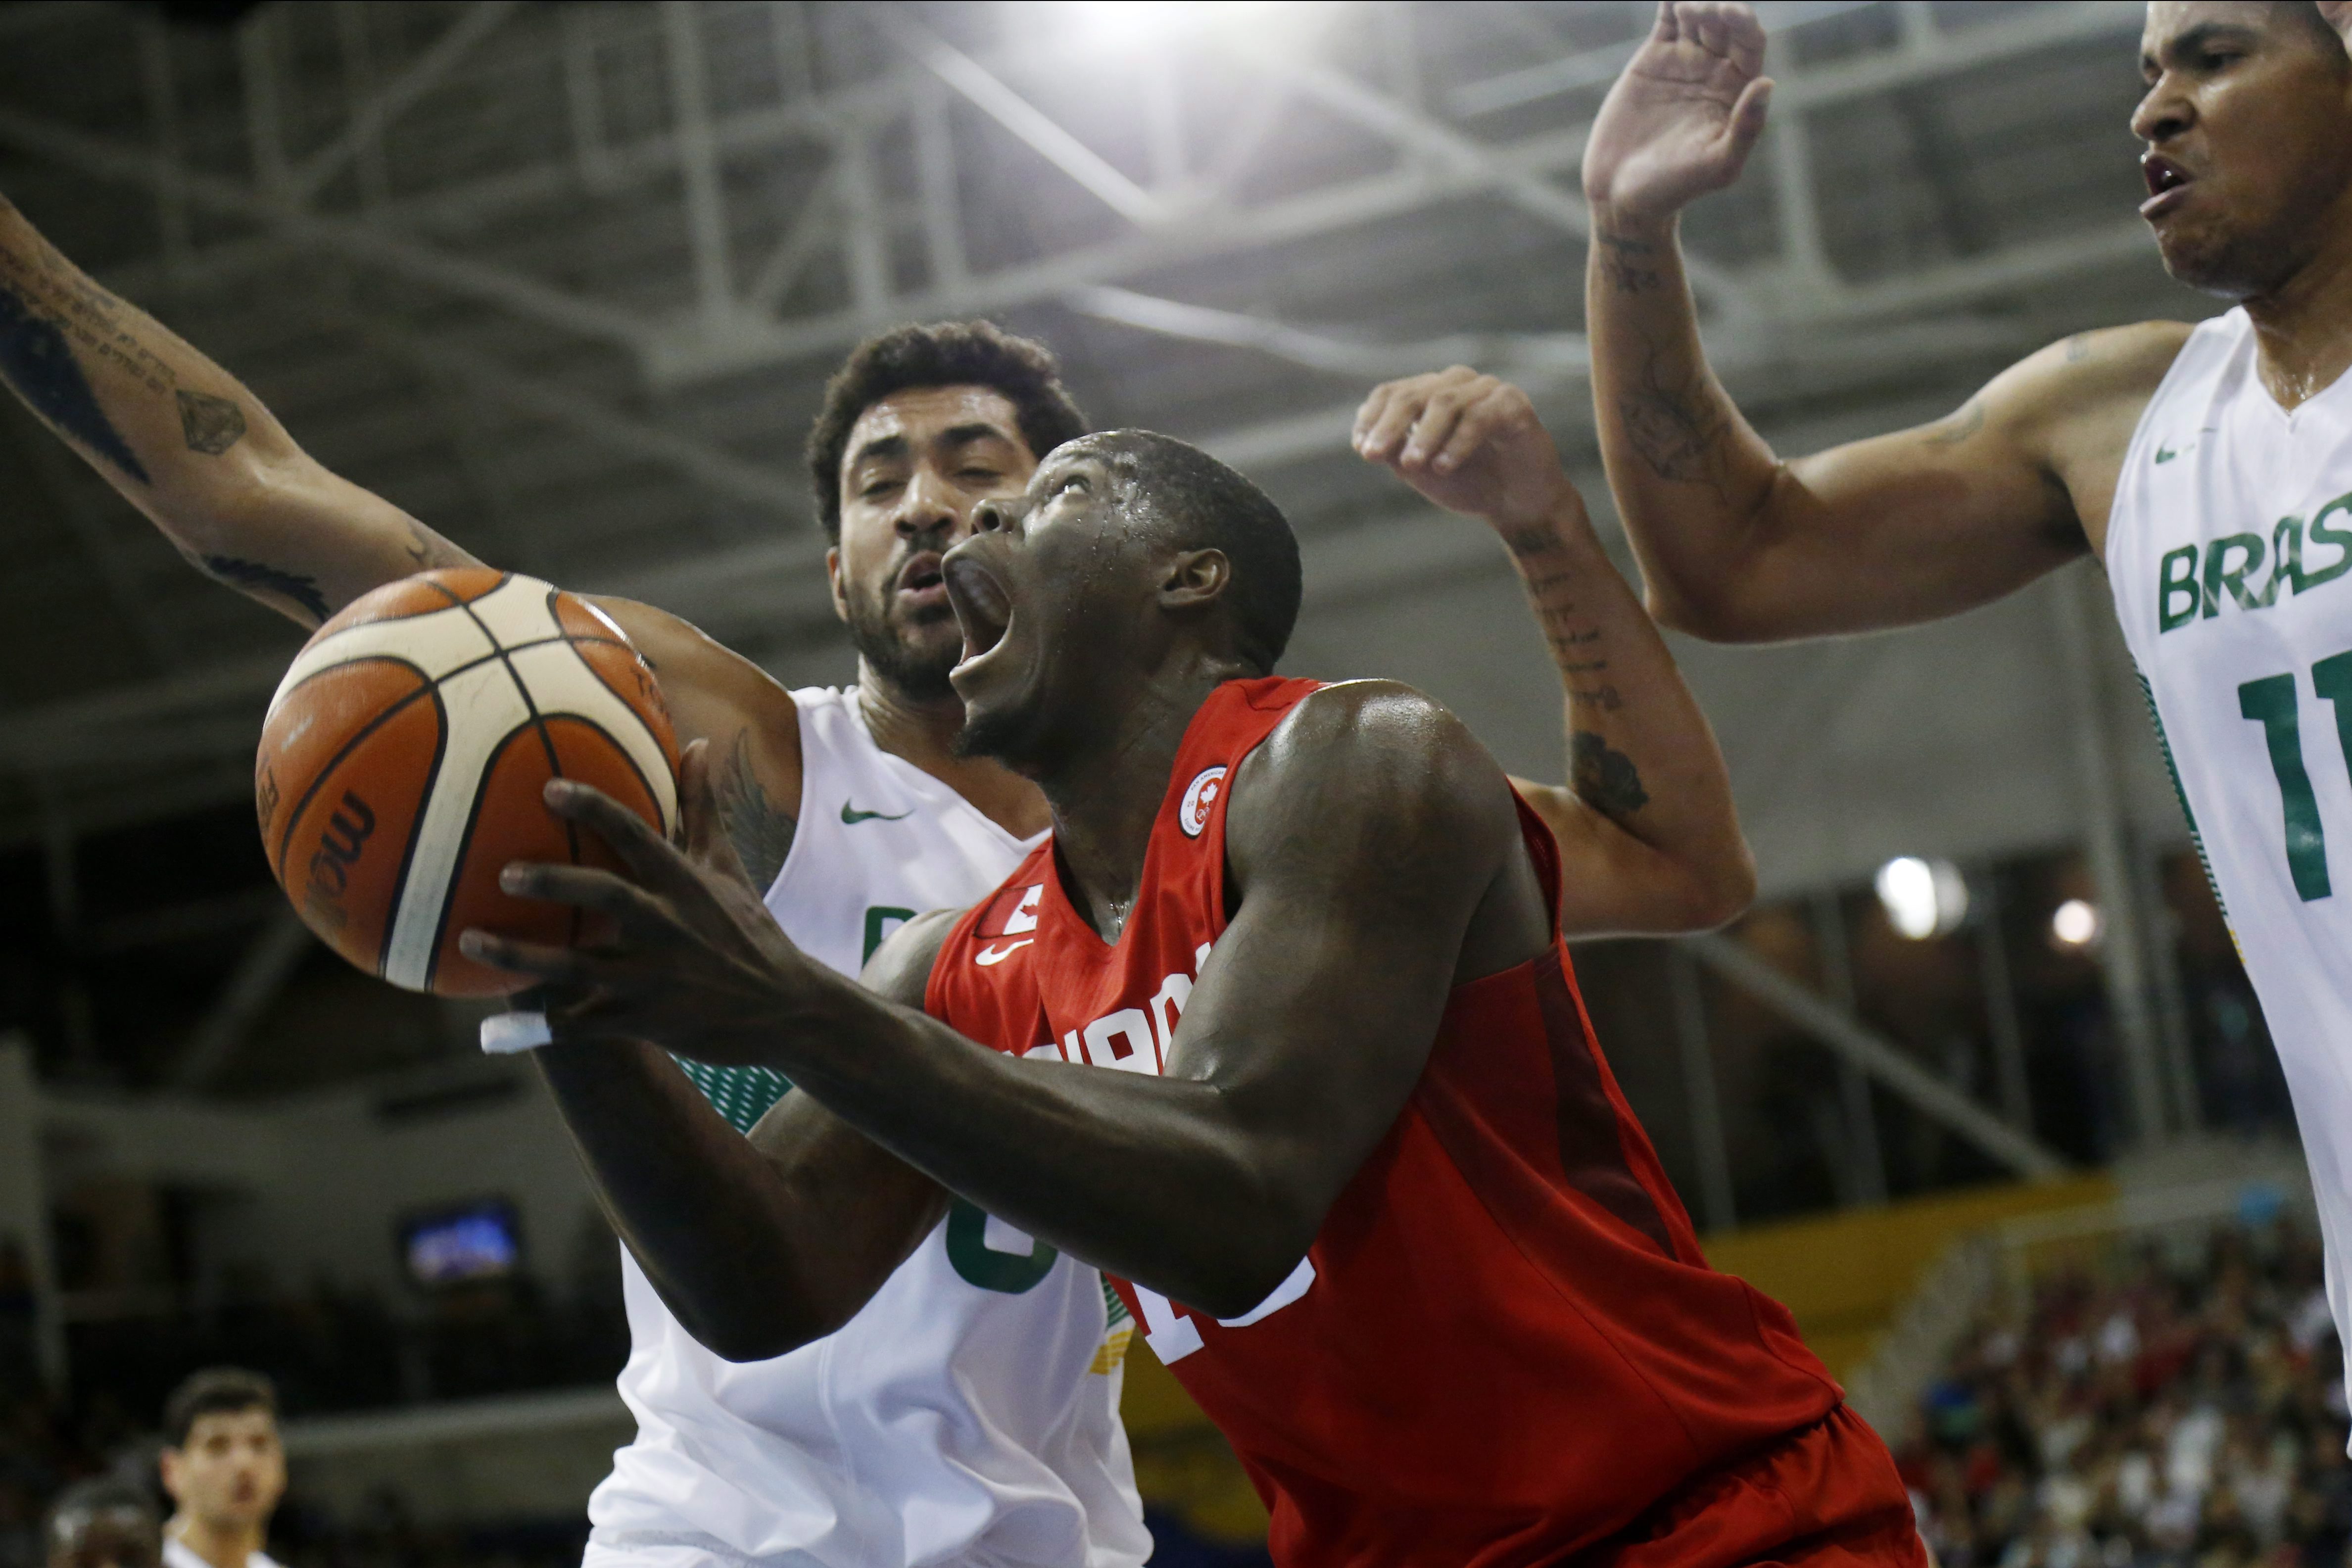 Canada's Anthony Bennett, center, looks to shoot against Brazil's Augusto Lima, left, and Rafael Hettsheimeir during the first quarter of the men's basketball gold medal game at the Pan Am Games, Saturday, July 25, 2015, in Toronto. (AP Photo/Julio Cortez)